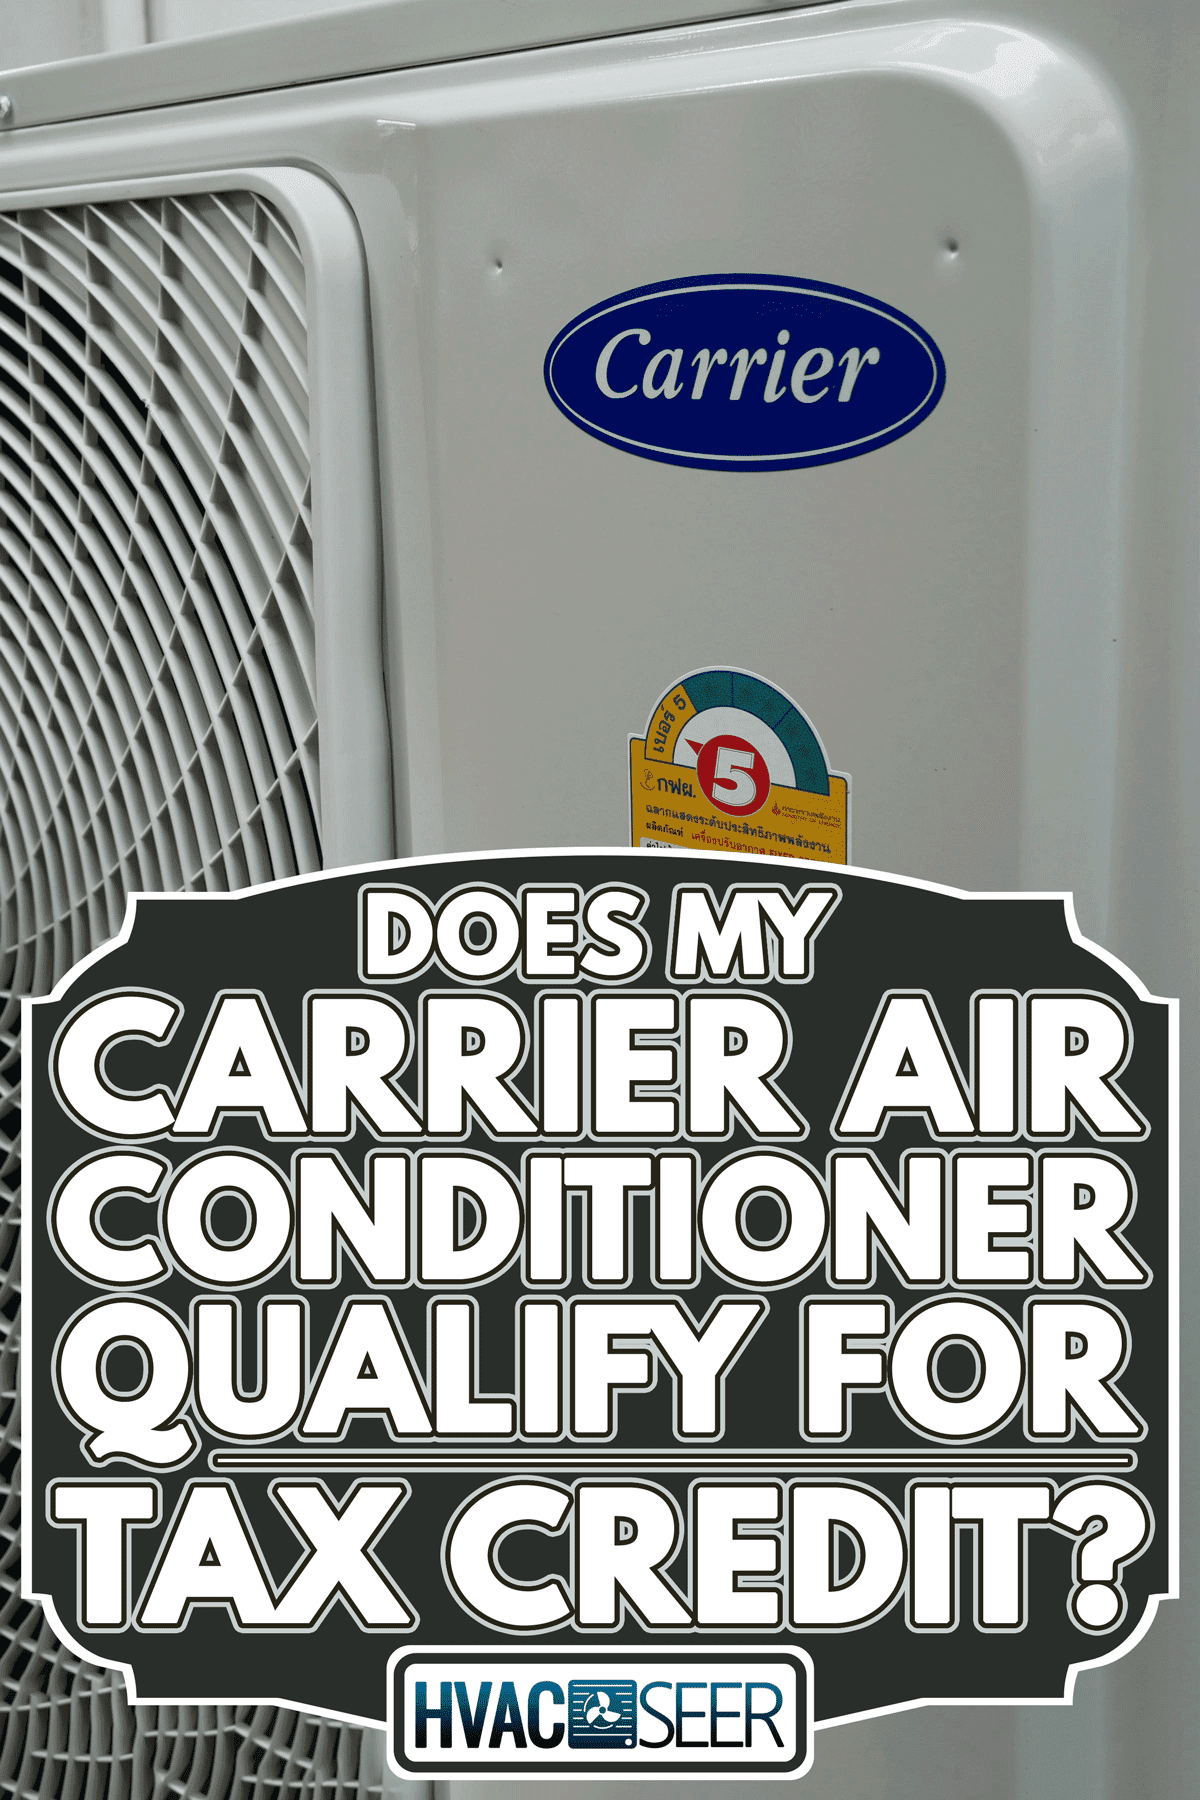 Carrier air conditioner unit at office, Does My Carrier Air Conditioner Qualify For Tax Credit?